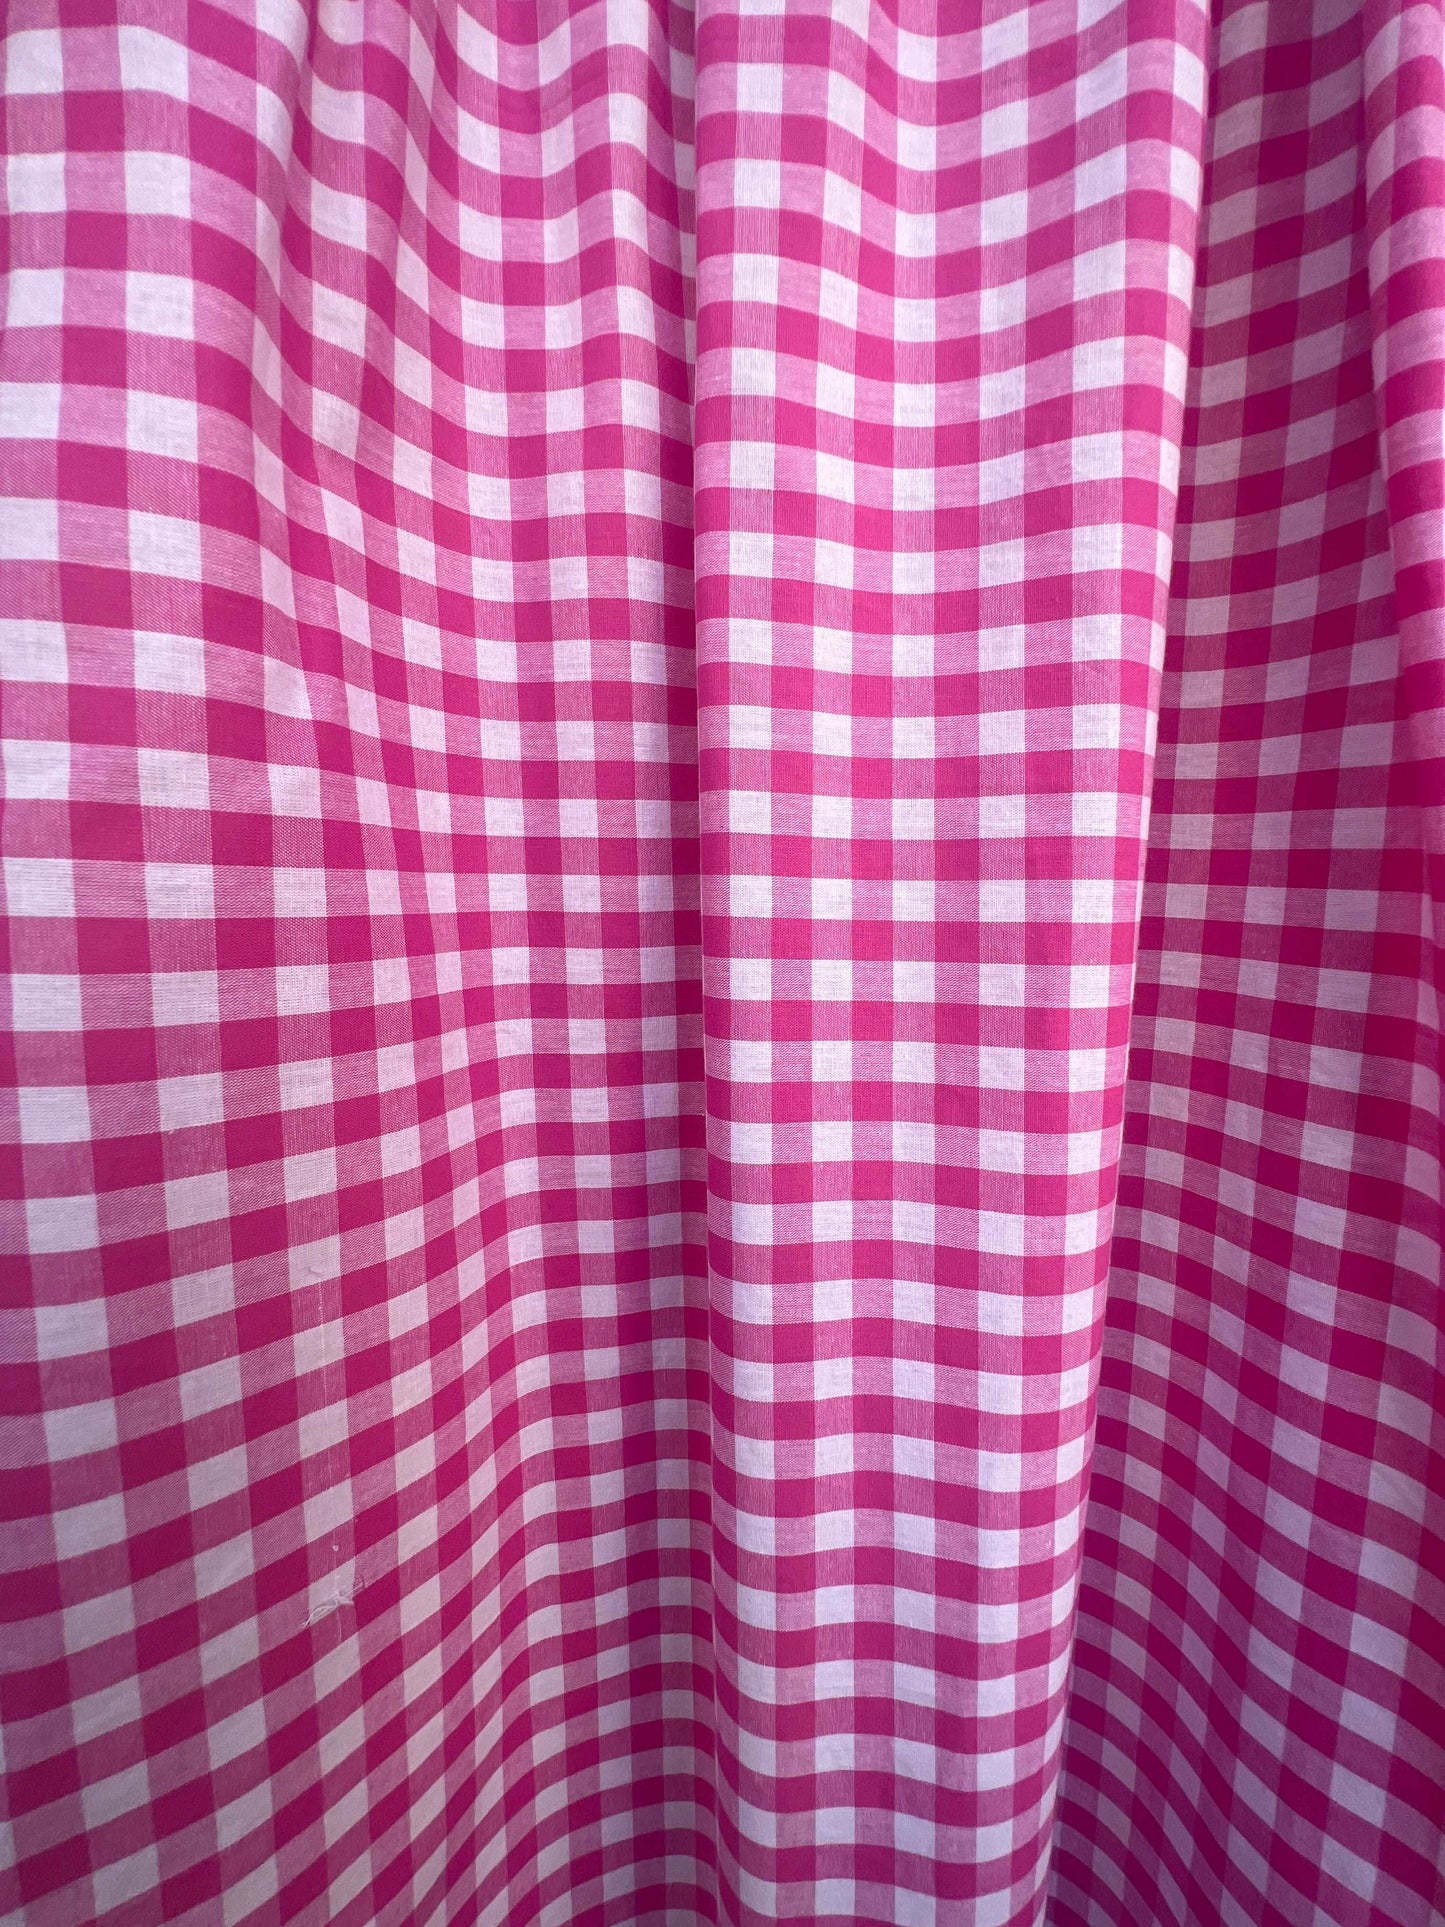 pink gingham fabric